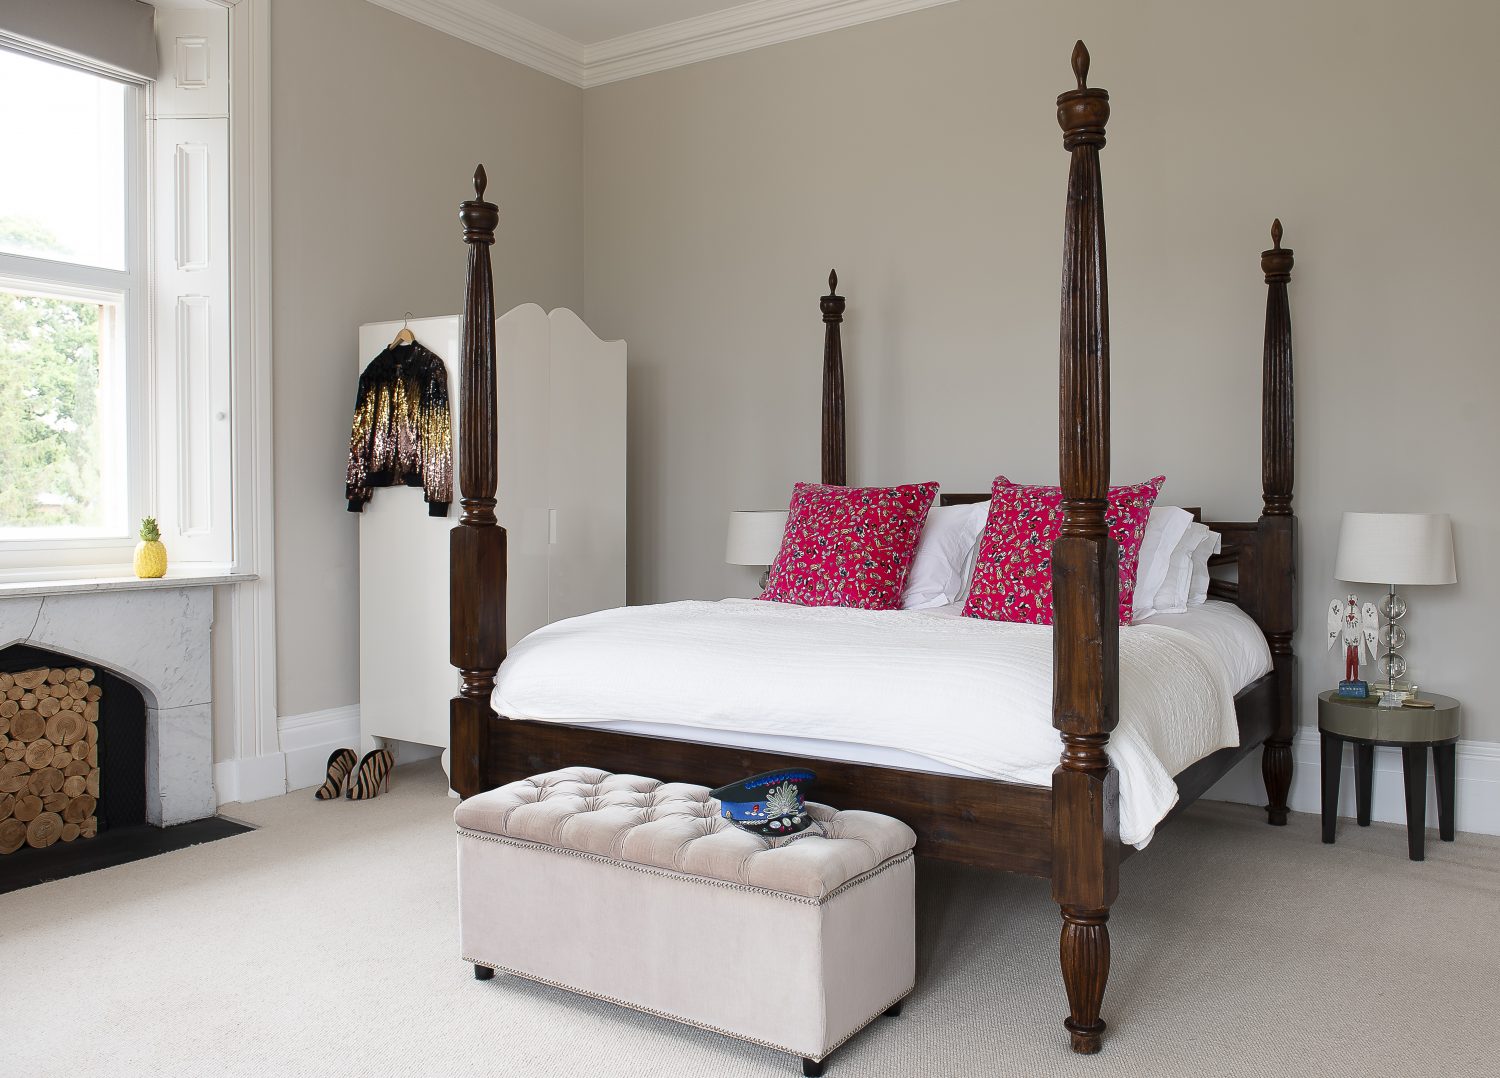 The couple’s luxurious bedroom suites feature chic four-poster beds and sumptuously soft carpet